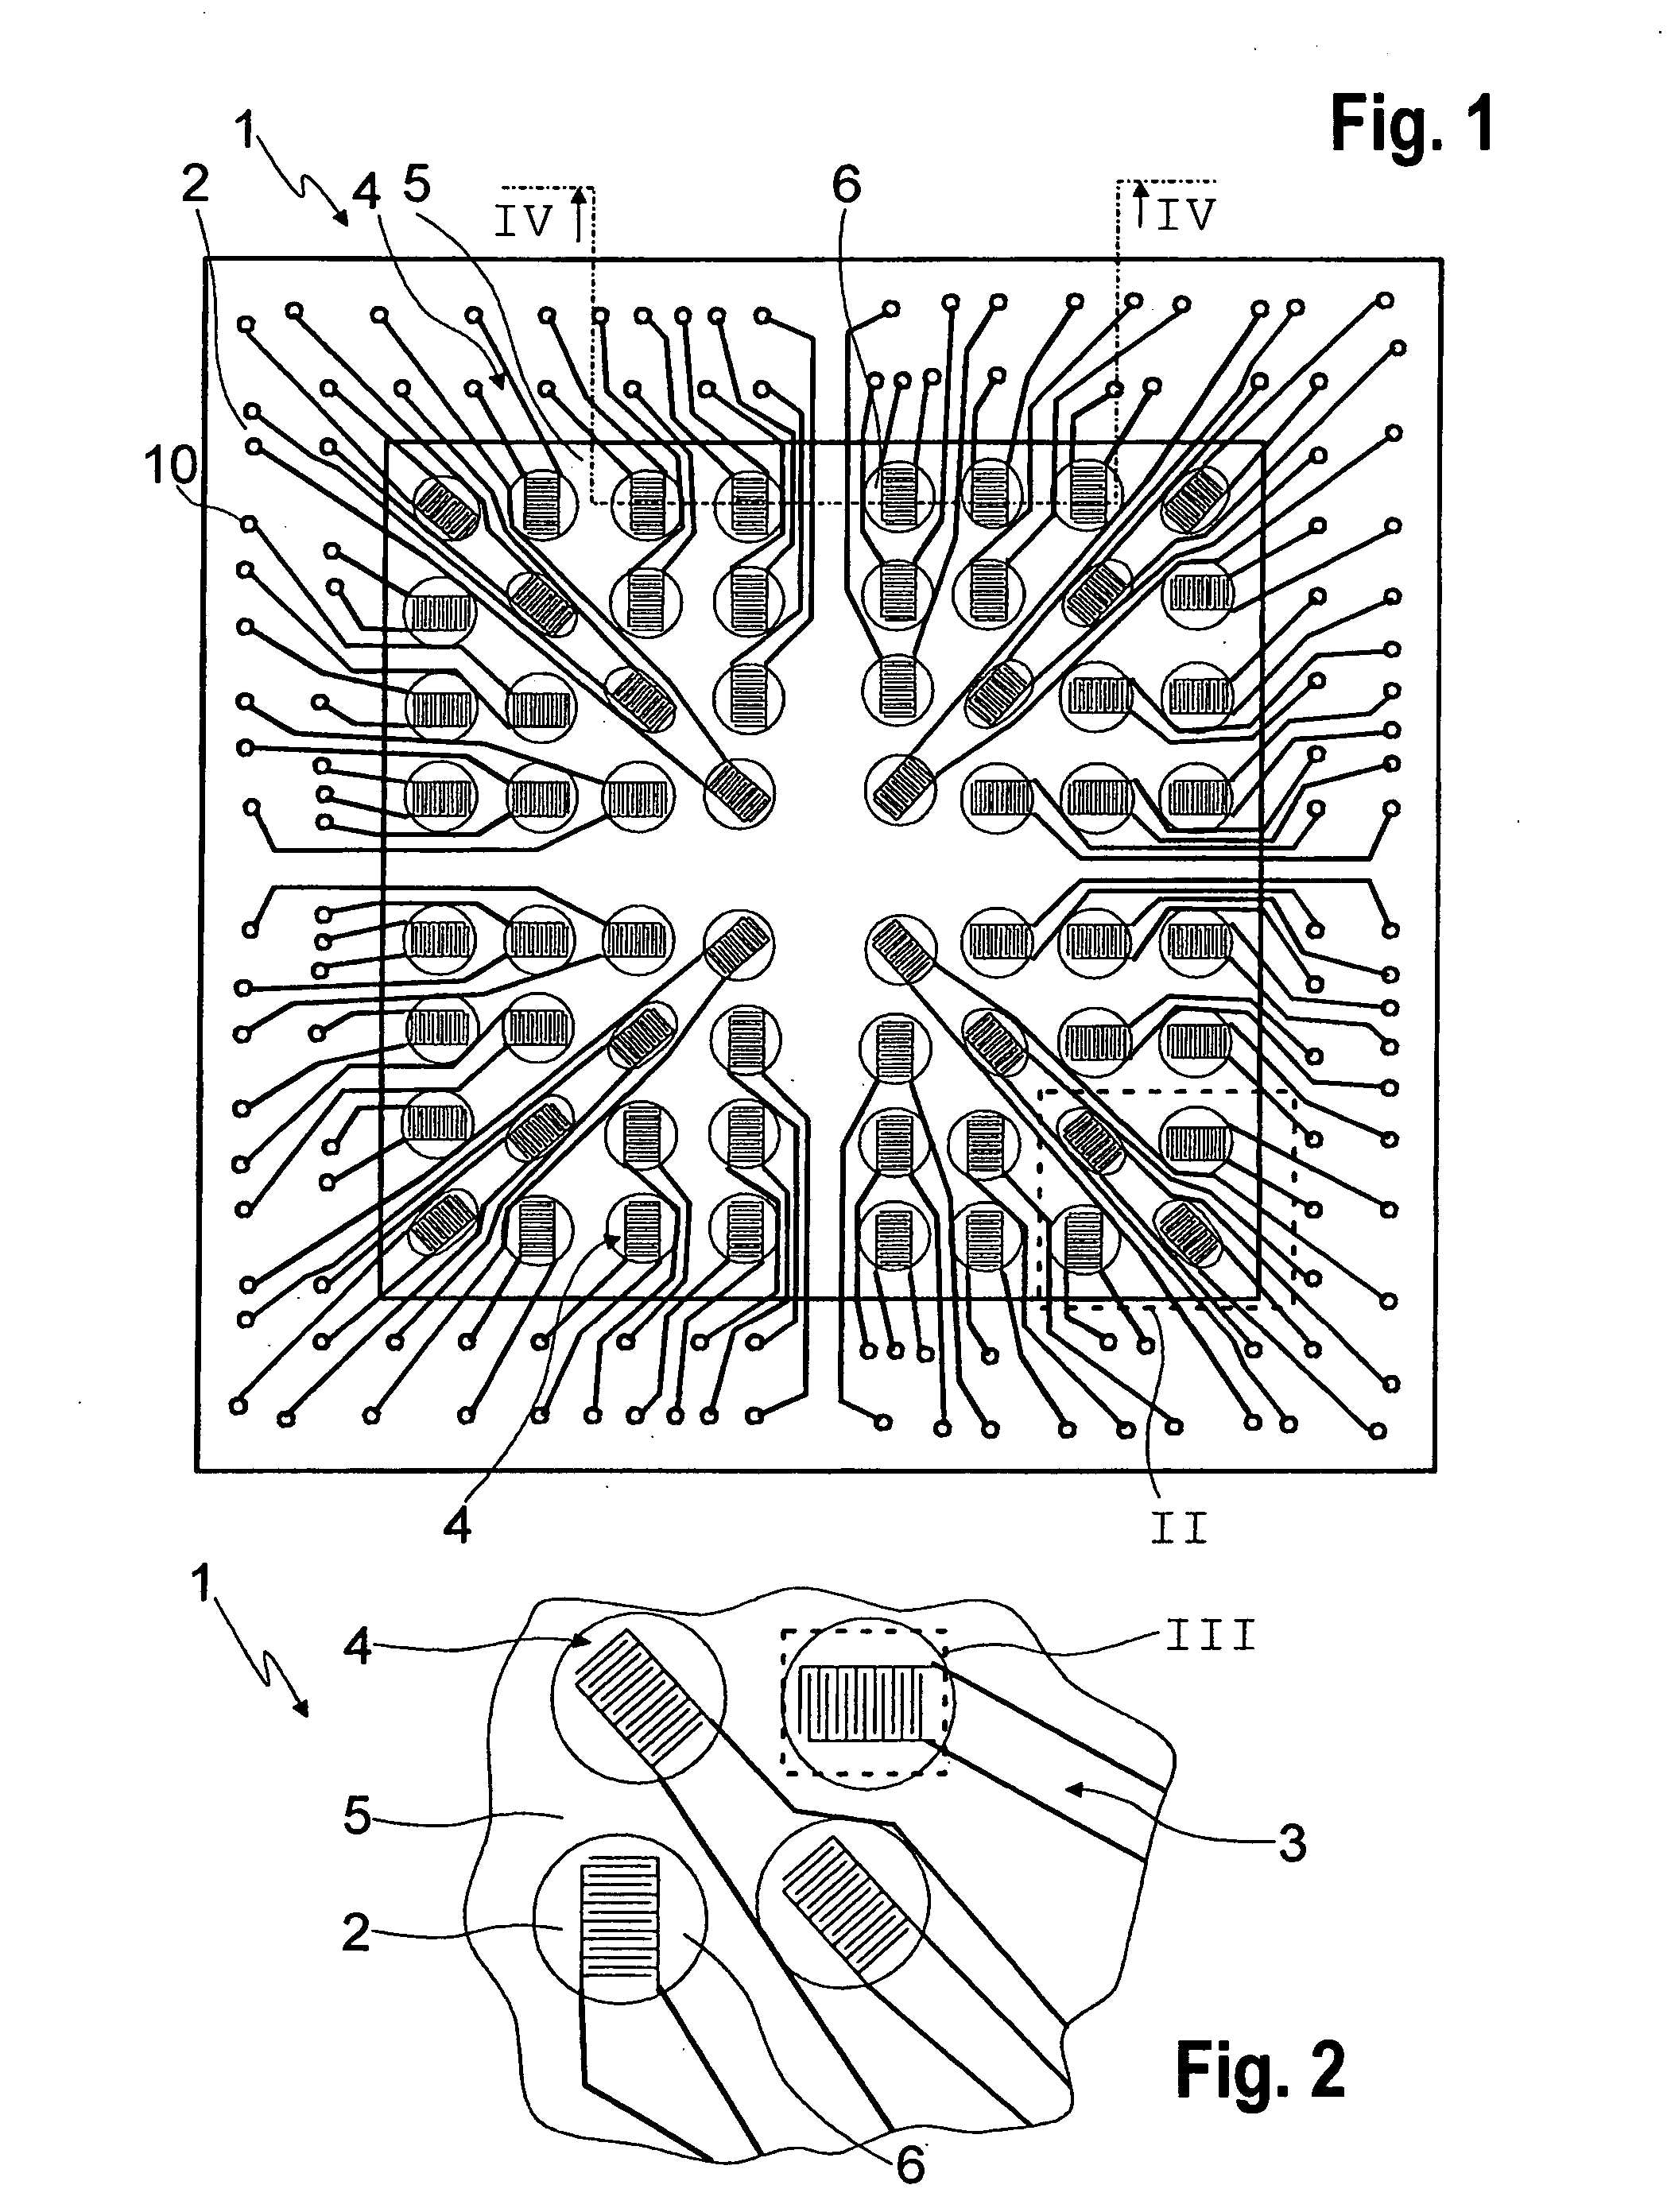 Measuring device having a plurality of potentiometric electrode pairs situated on a substrate